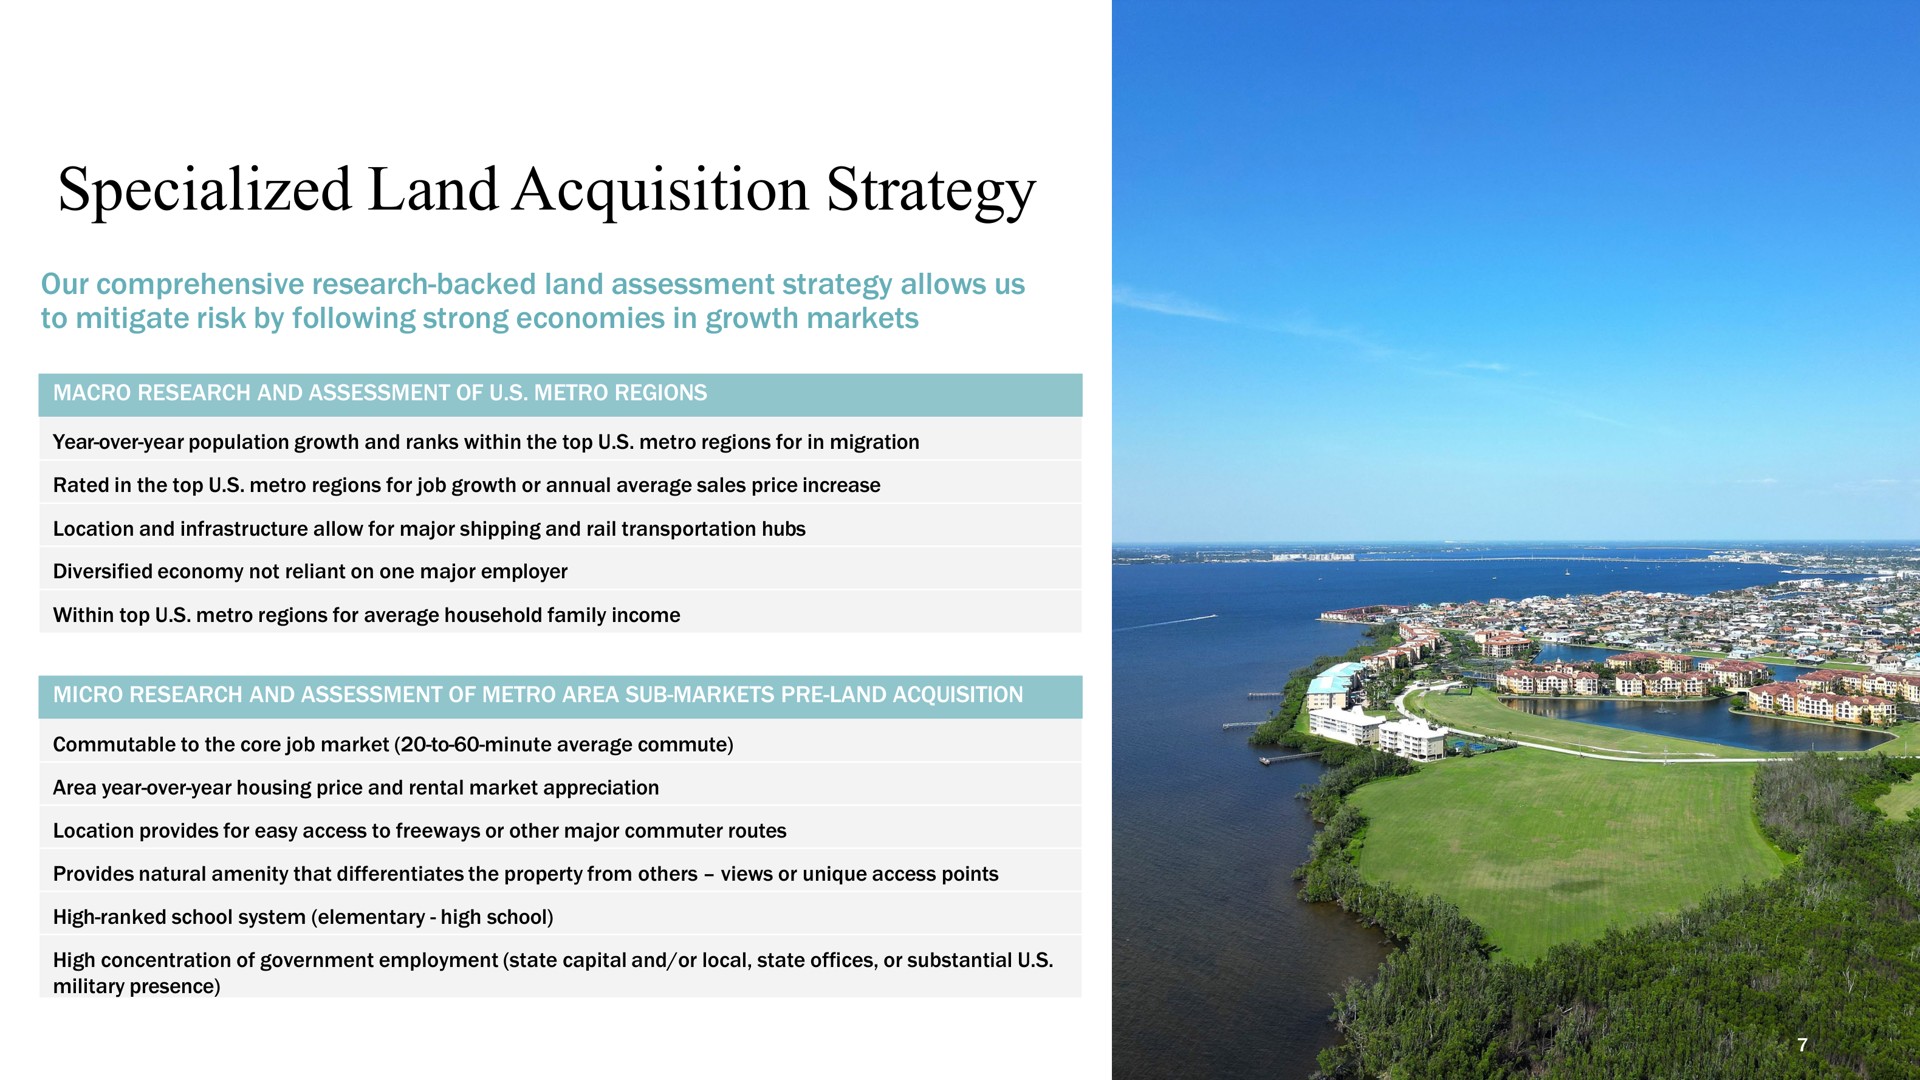 specialized land acquisition strategy our comprehensive research backed land assessment strategy allows us to mitigate risk by following strong economies in growth markets macro research and assessment of regions micro research and assessment of area sub markets land acquisition | Harbor Custom Development